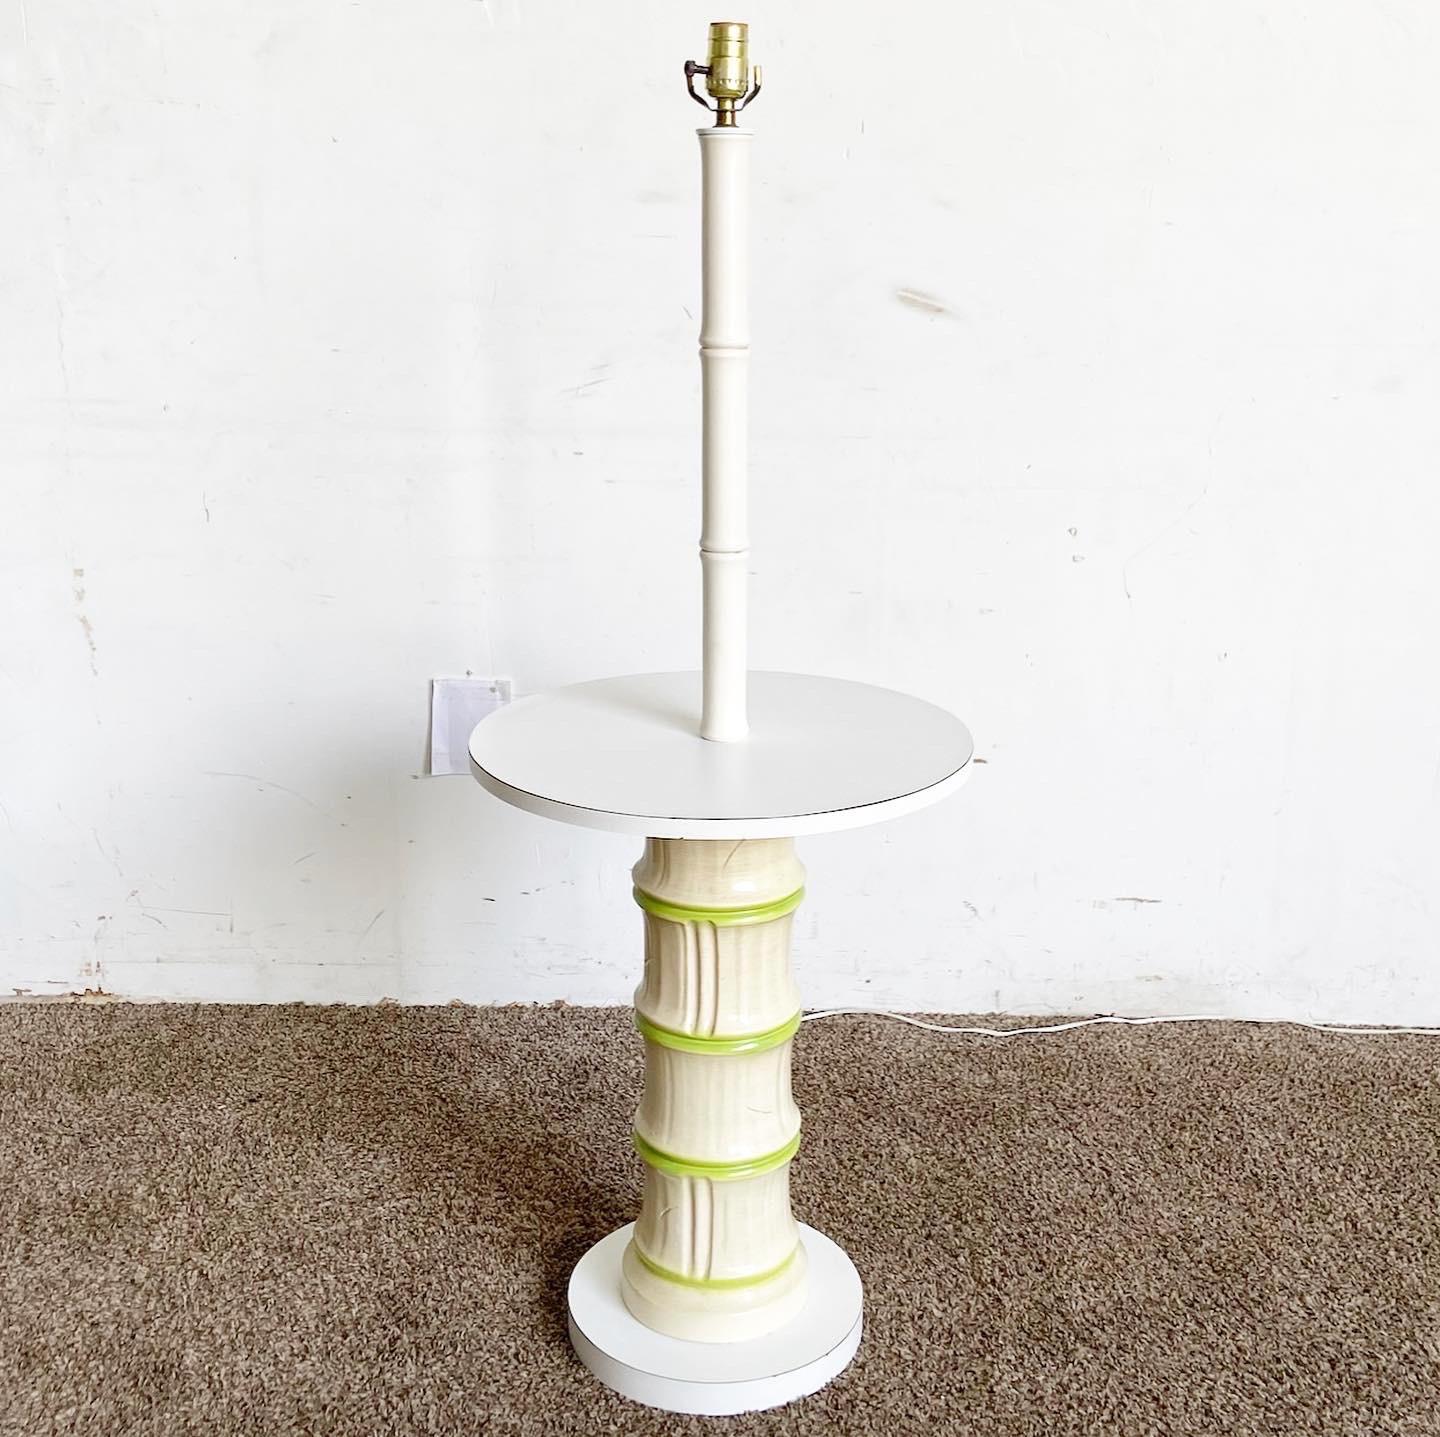 Discover the Regency Faux Bamboo Lamp/Table Combo, a versatile piece that serves as both a floor lamp and a side table. With its ceramic stem and faux bamboo wood details, this item combines classic elegance with utility, fitting perfectly in both